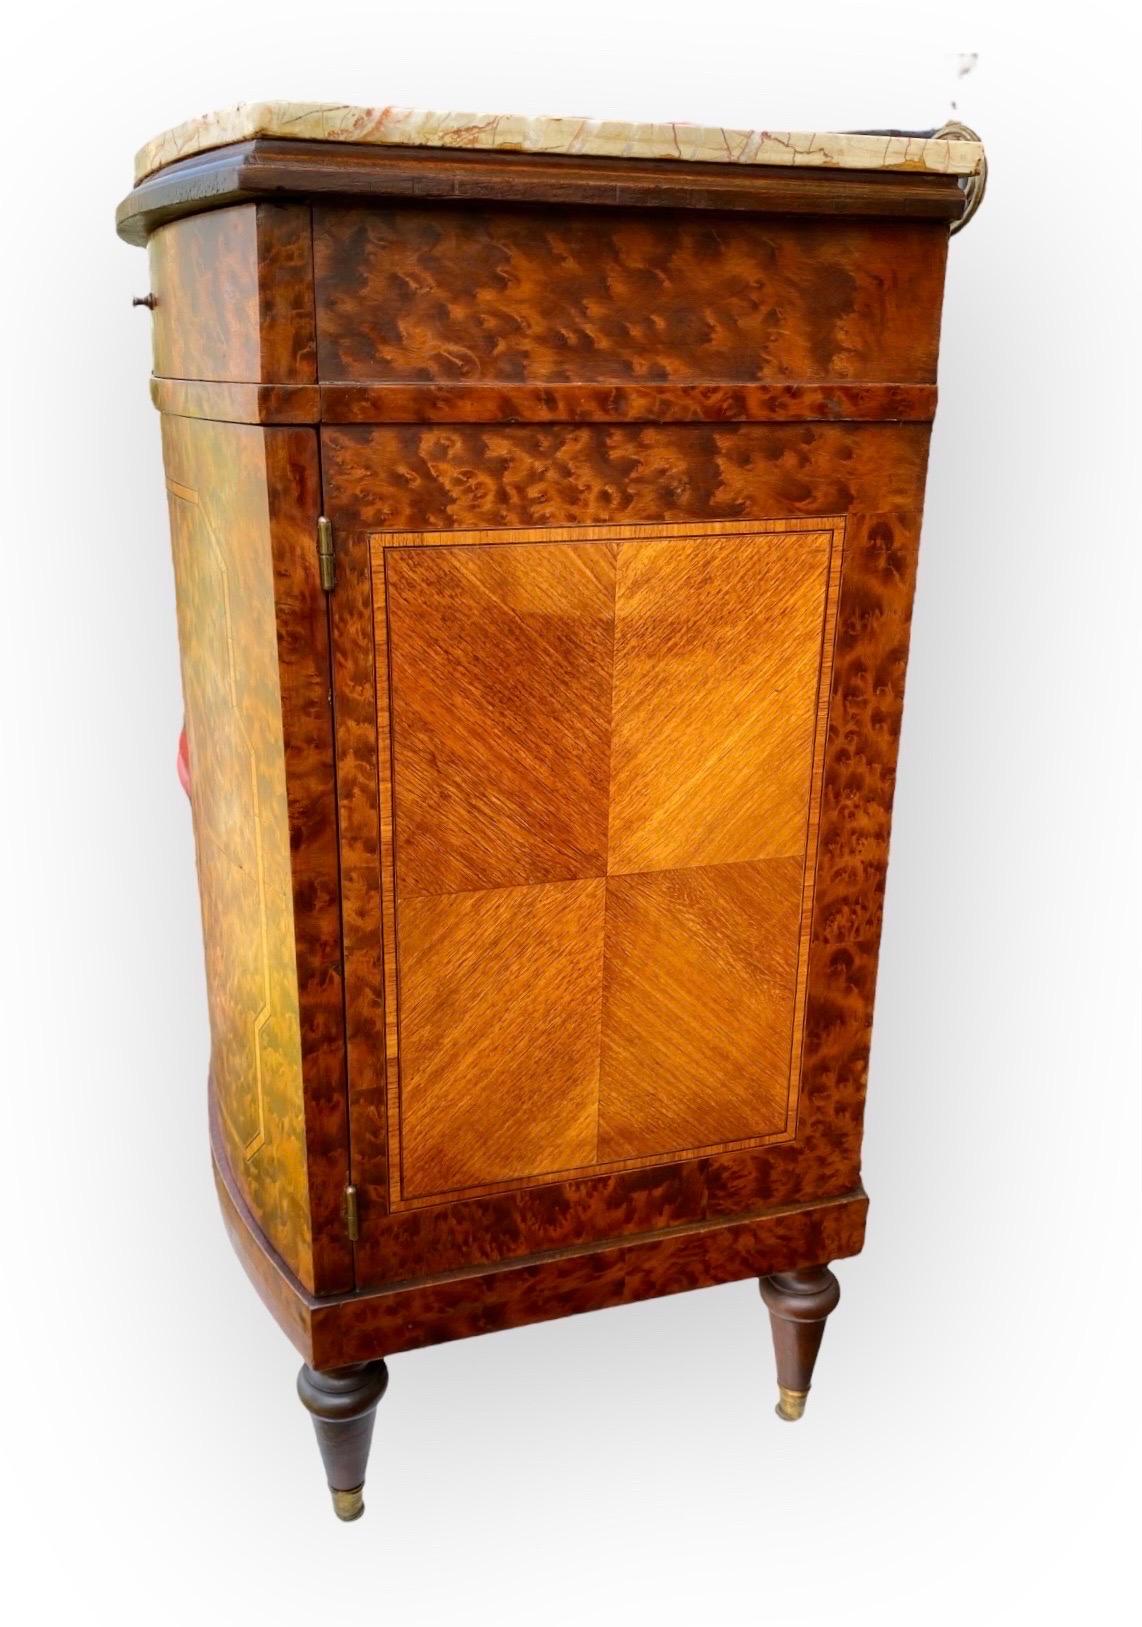 Hand-Crafted French Beaux Arts Inlaid Marquetry Burl Walnut Side Cabinet With Marble Tops  For Sale